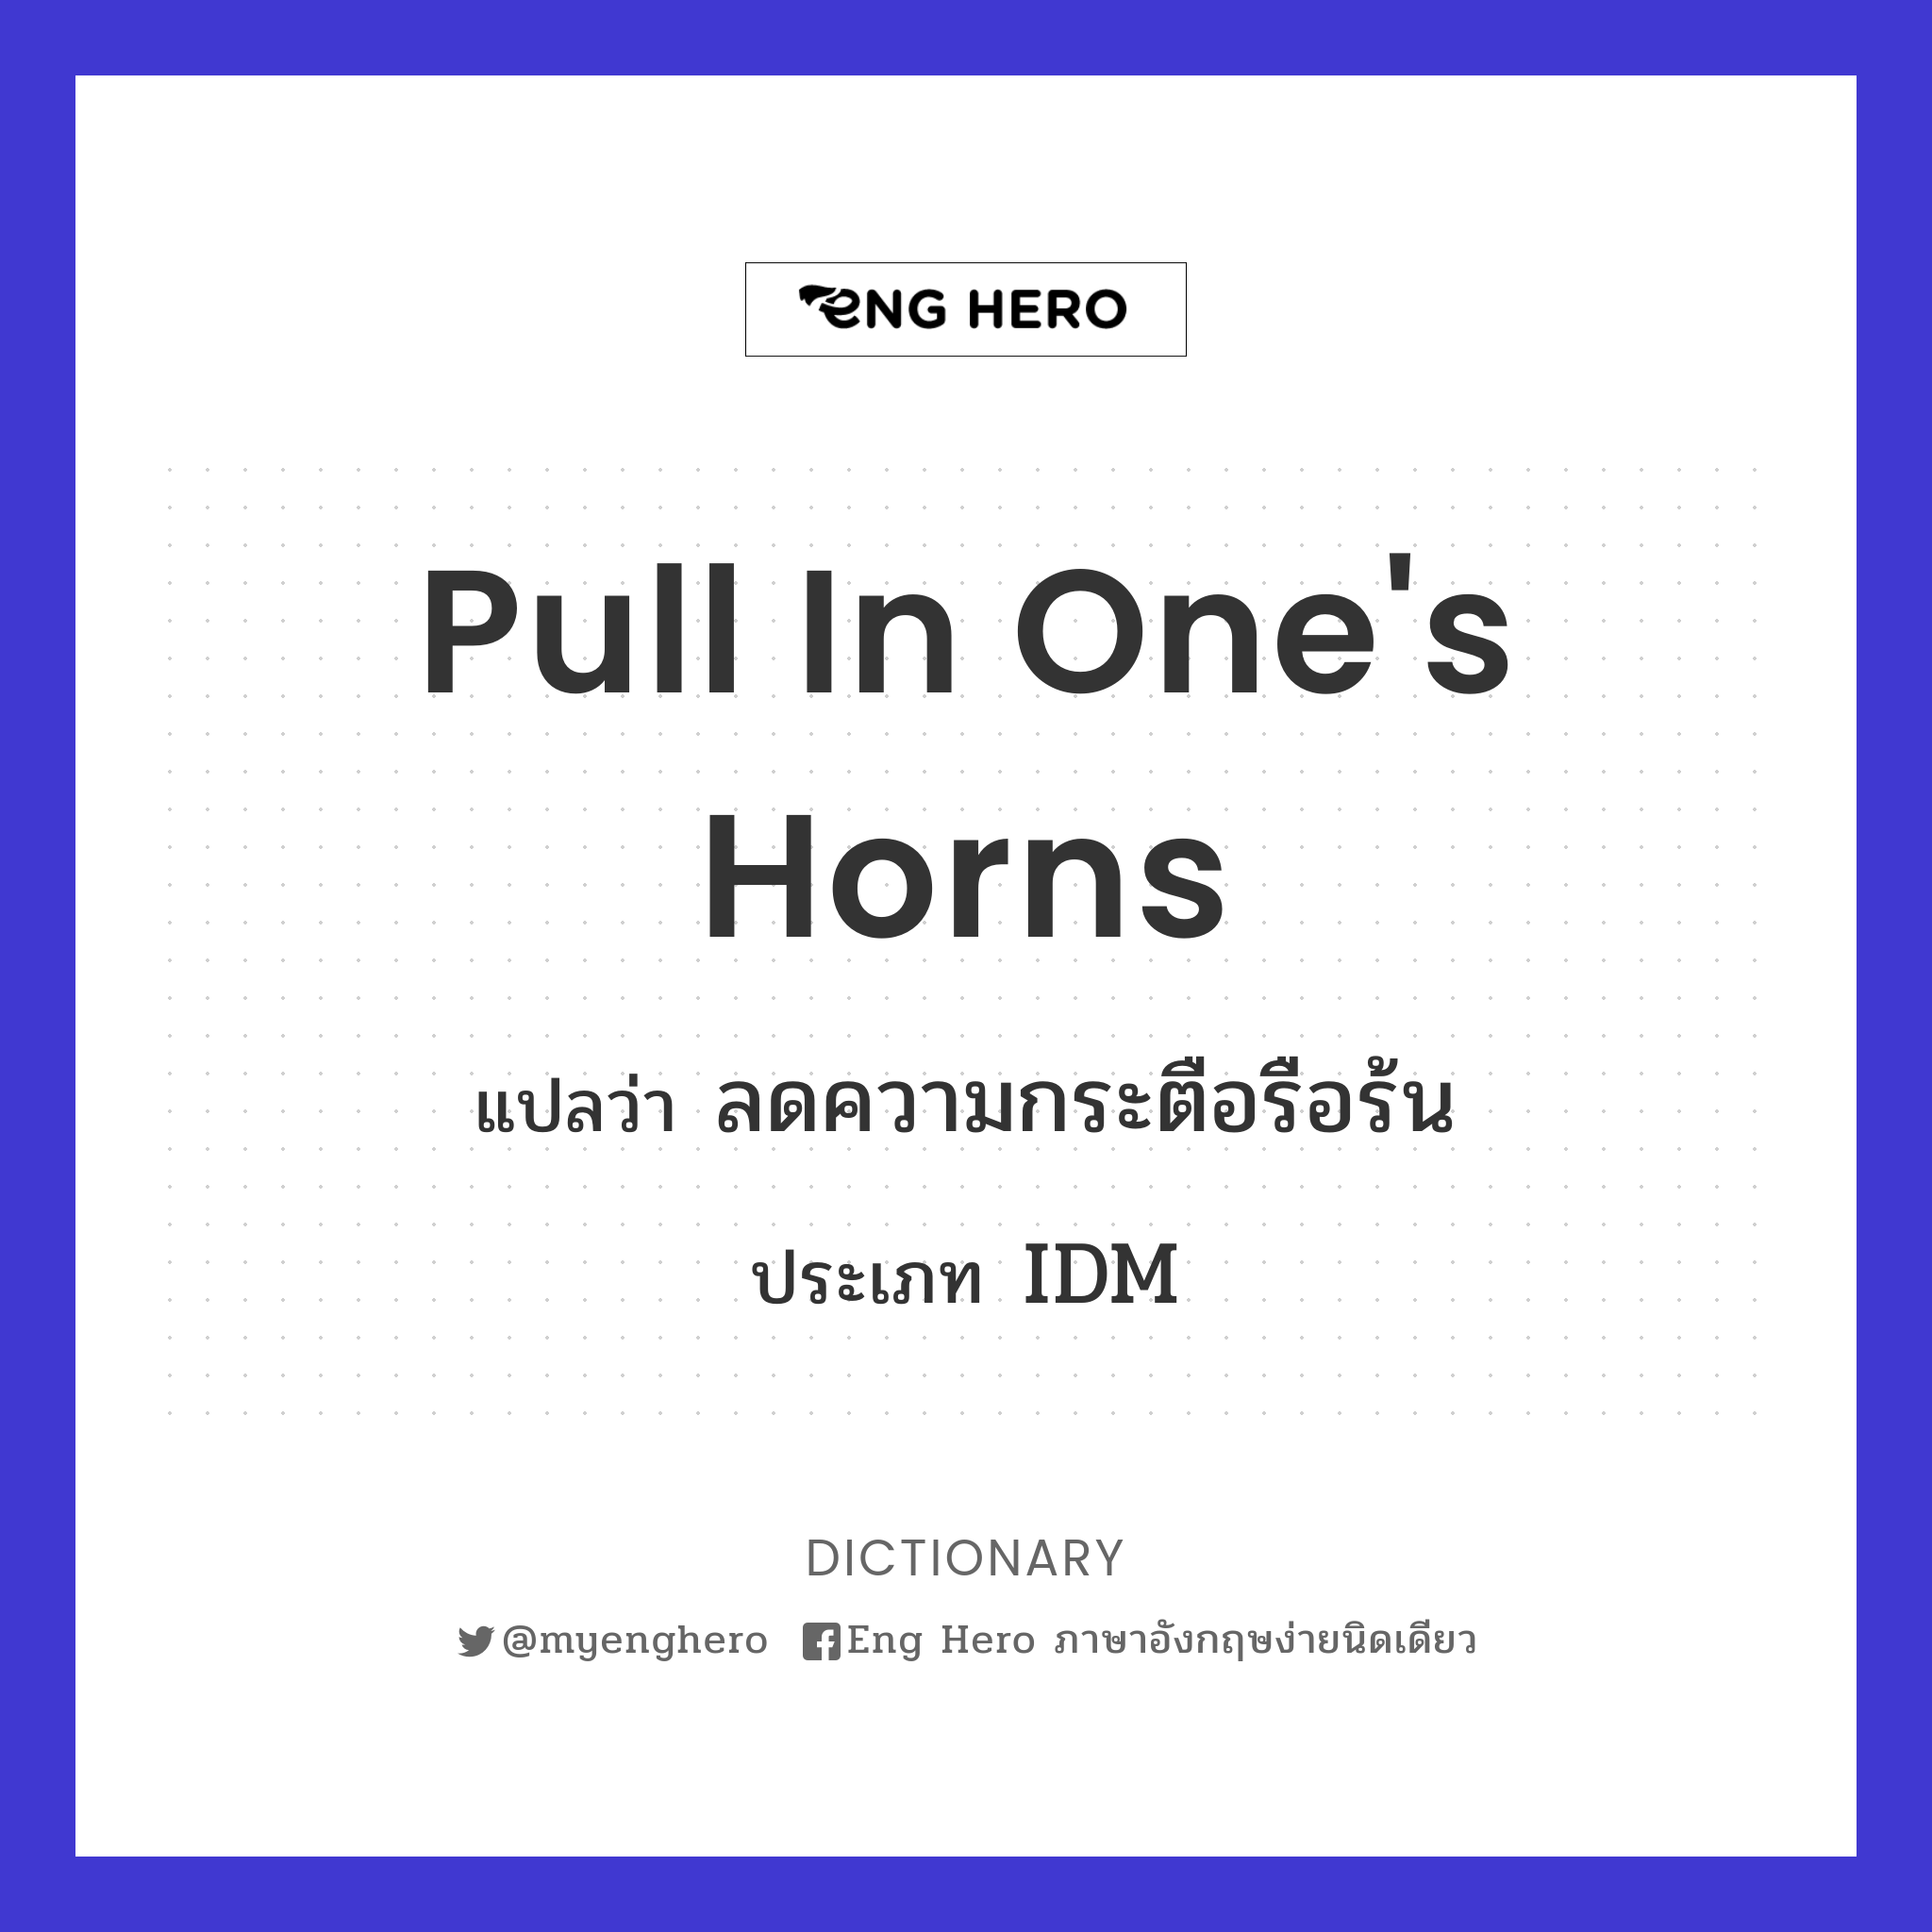 pull in one's horns